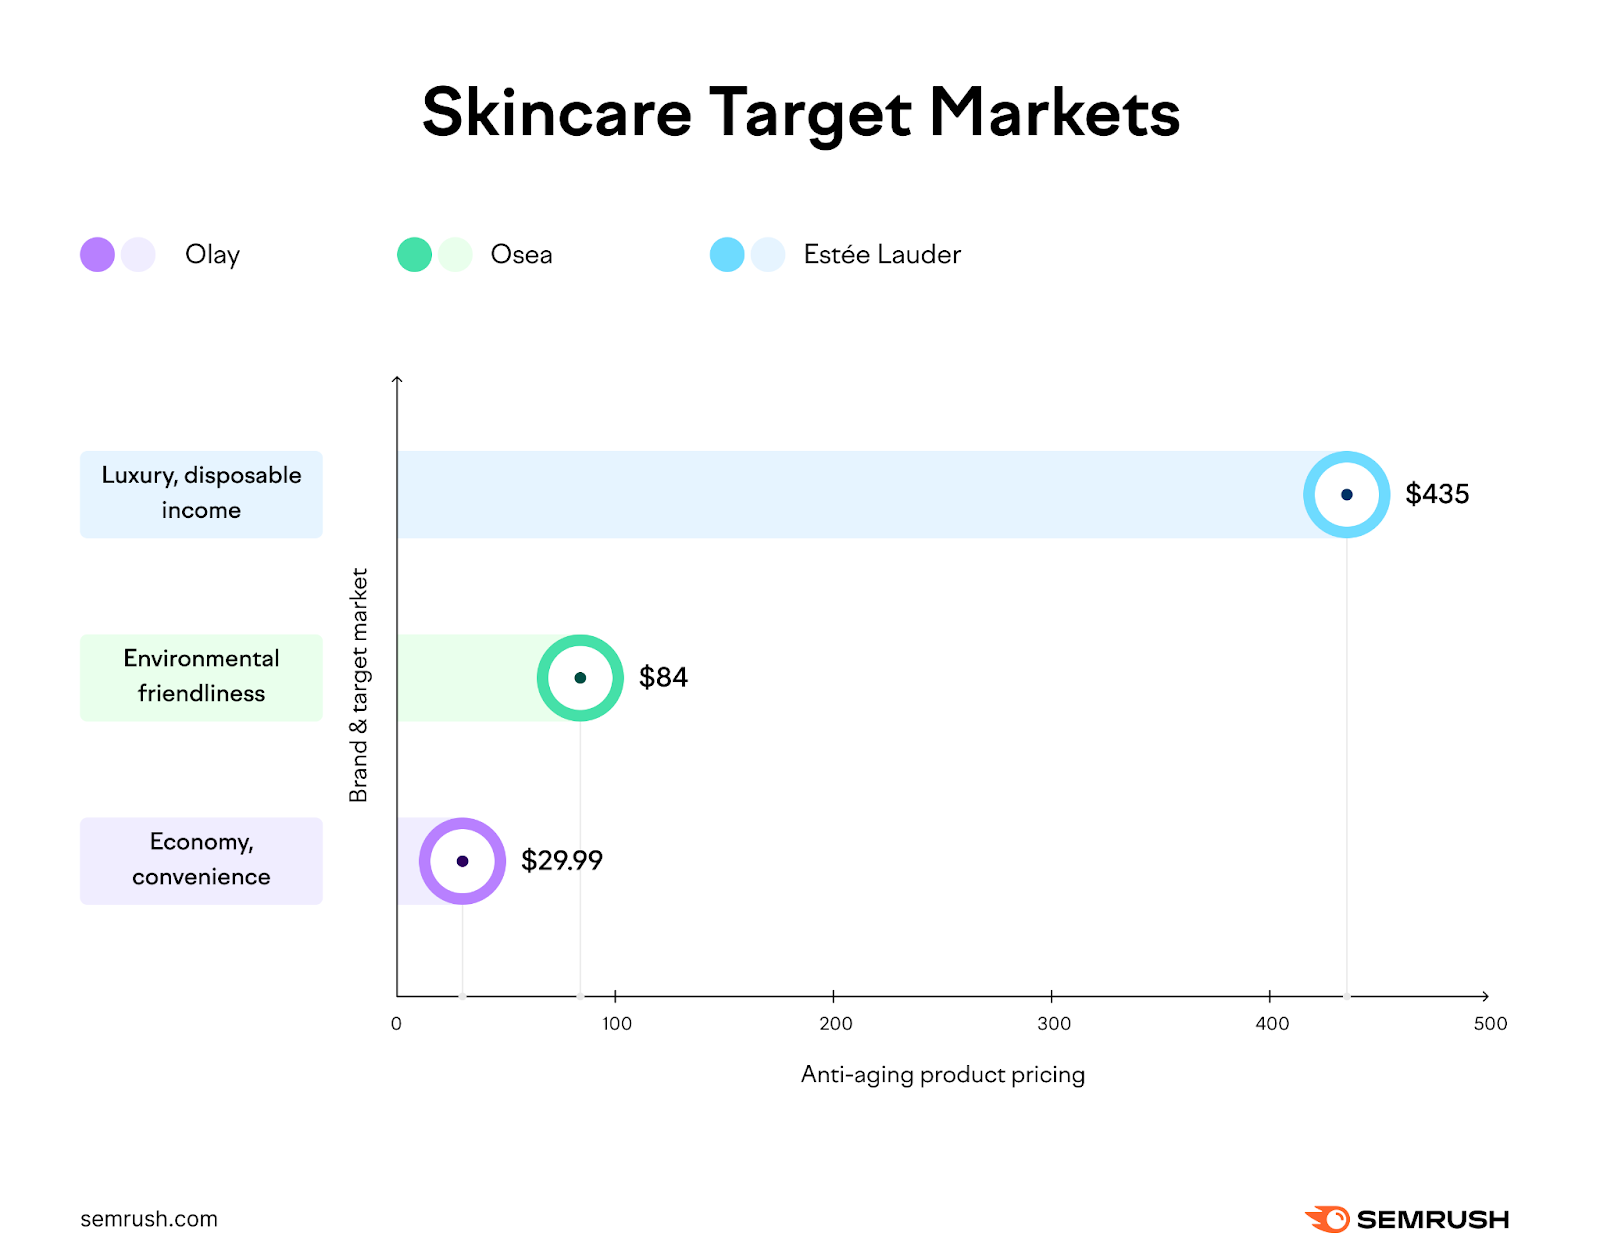 Skincare target markets infographic, showing product pricing for Estée Lauder, OSEA, and Olay